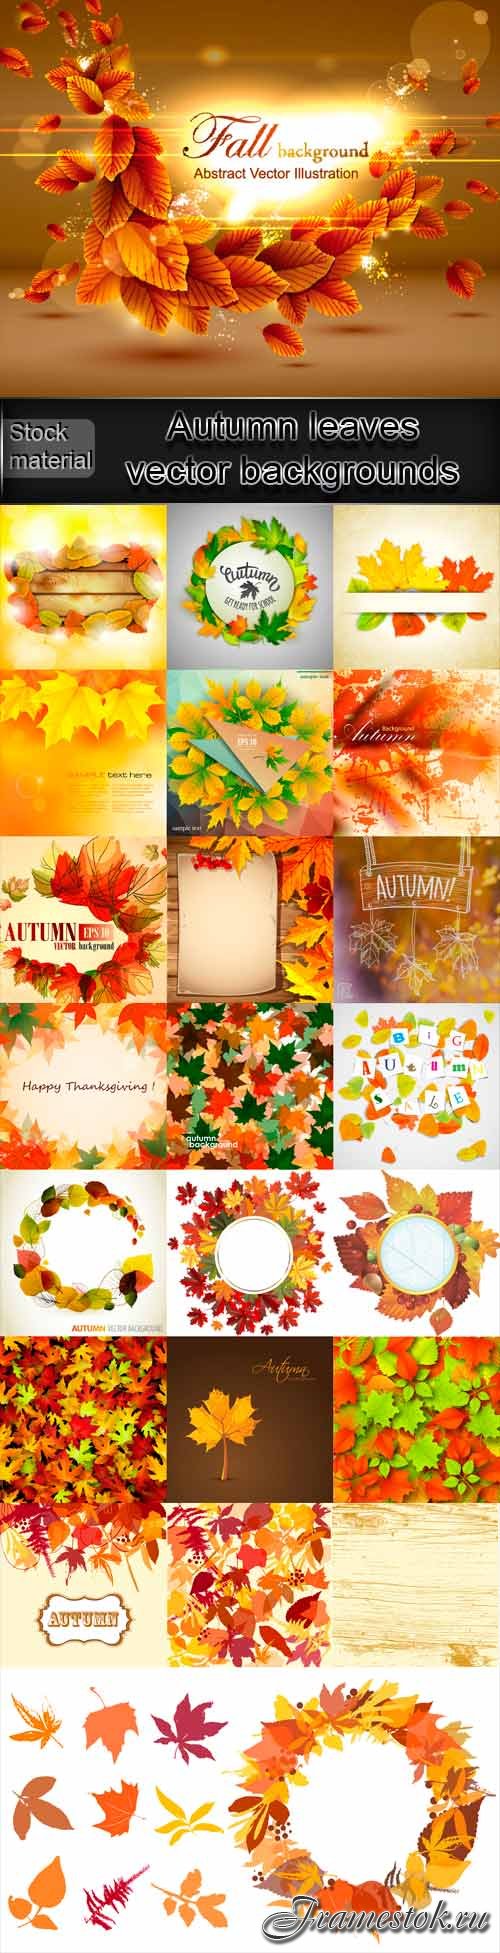 Autumn leaves vector backgrounds